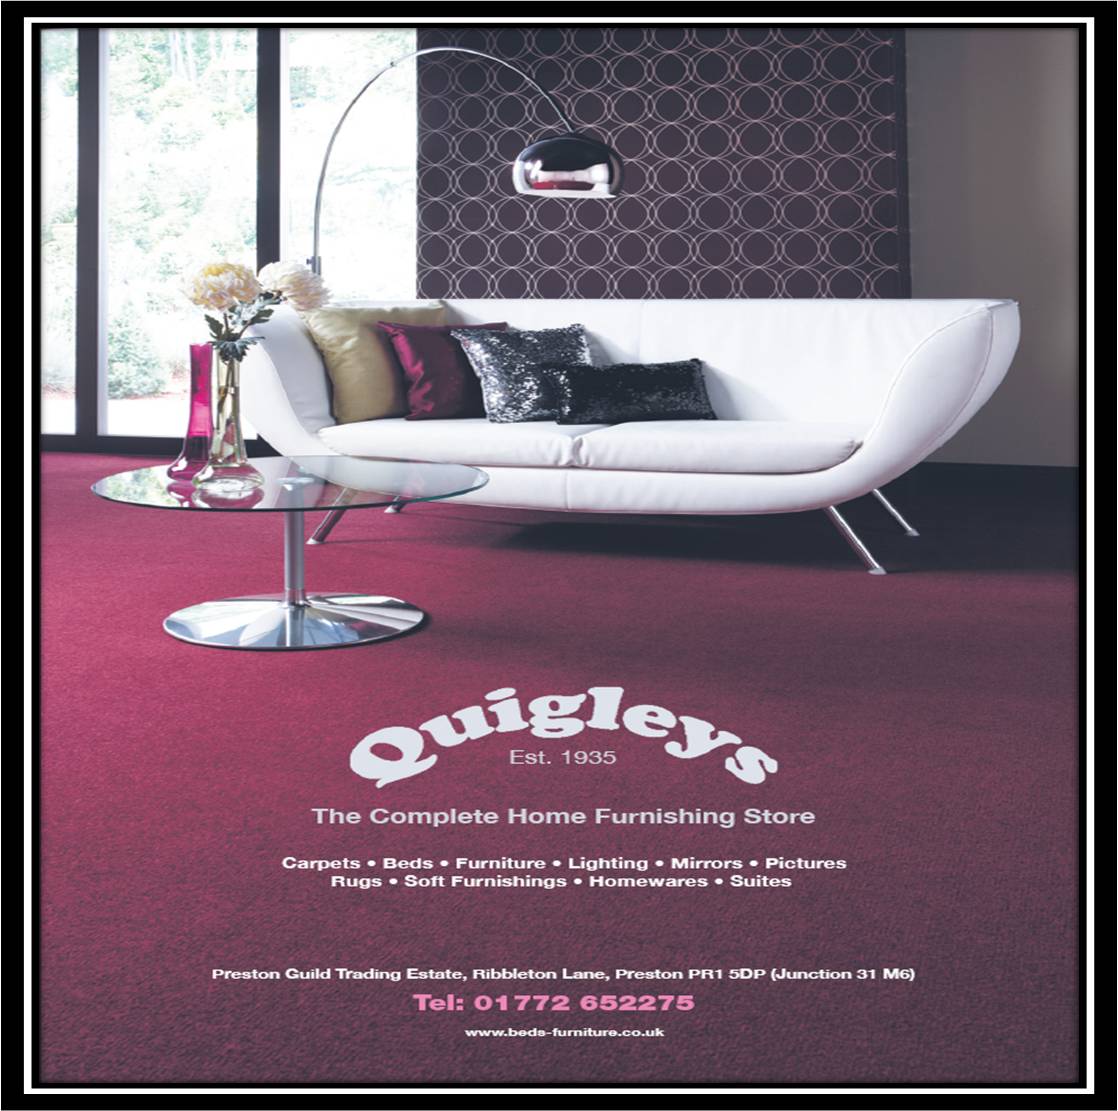 QUIGLEYS QUALITY BEDS AND FURNITURE SUPERSTORE